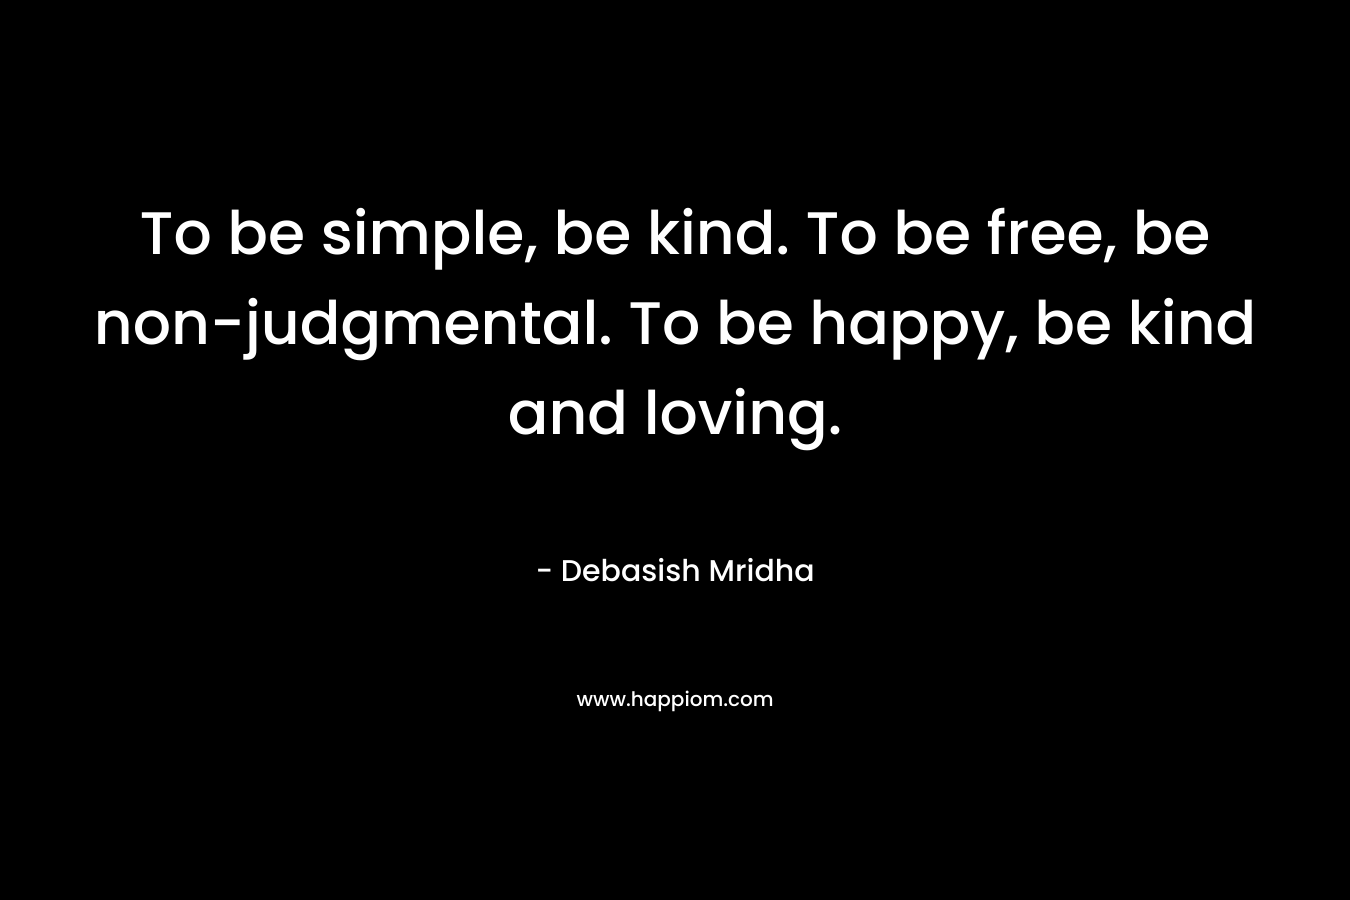 To be simple, be kind. To be free, be non-judgmental. To be happy, be kind and loving.